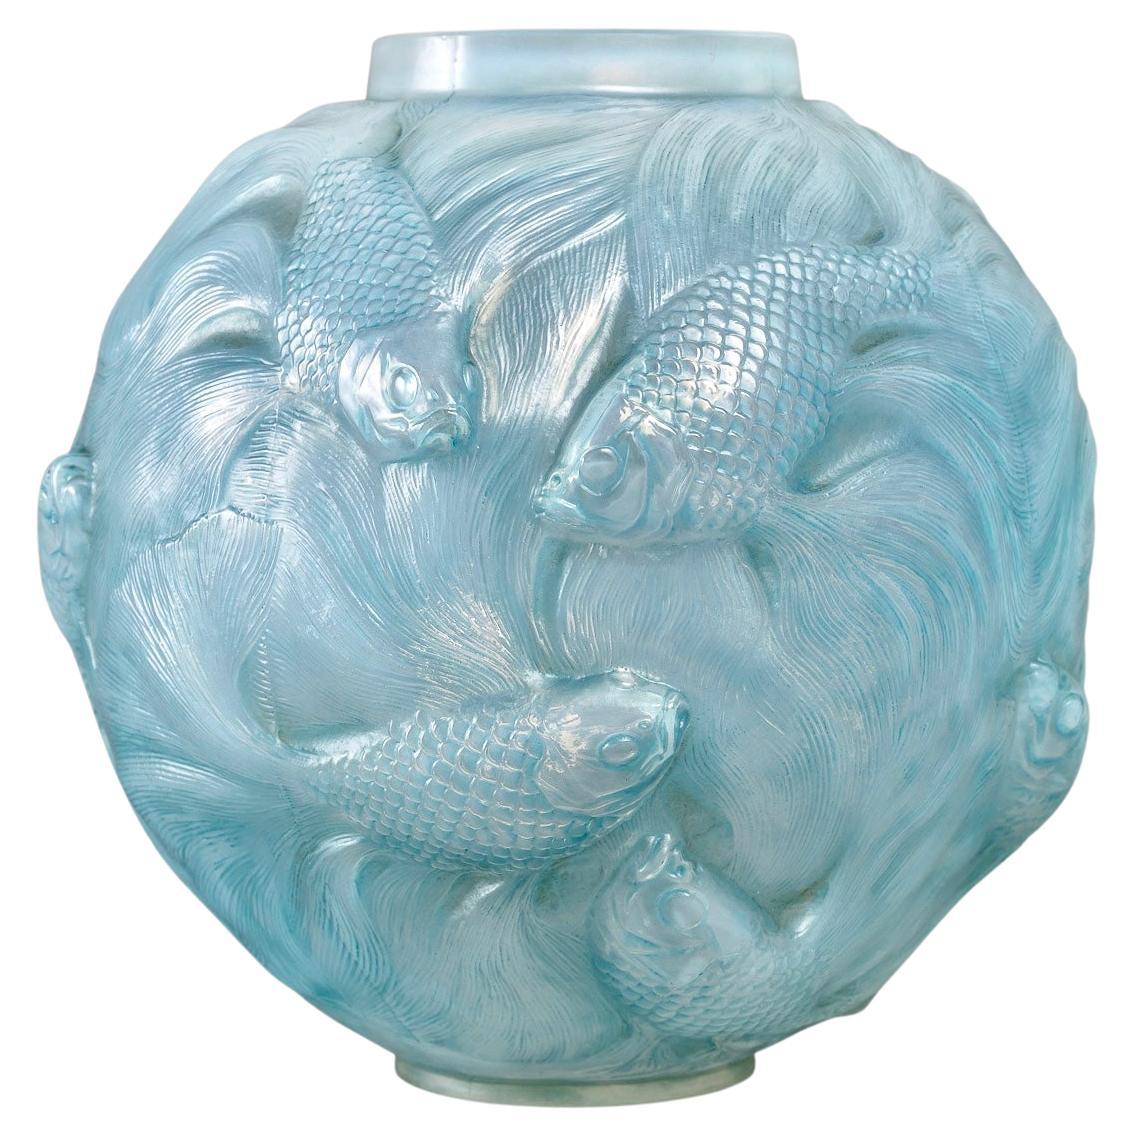 1924 Rene Lalique, Vase Formose Triple Cased Opalescent Glass with Blue Patina